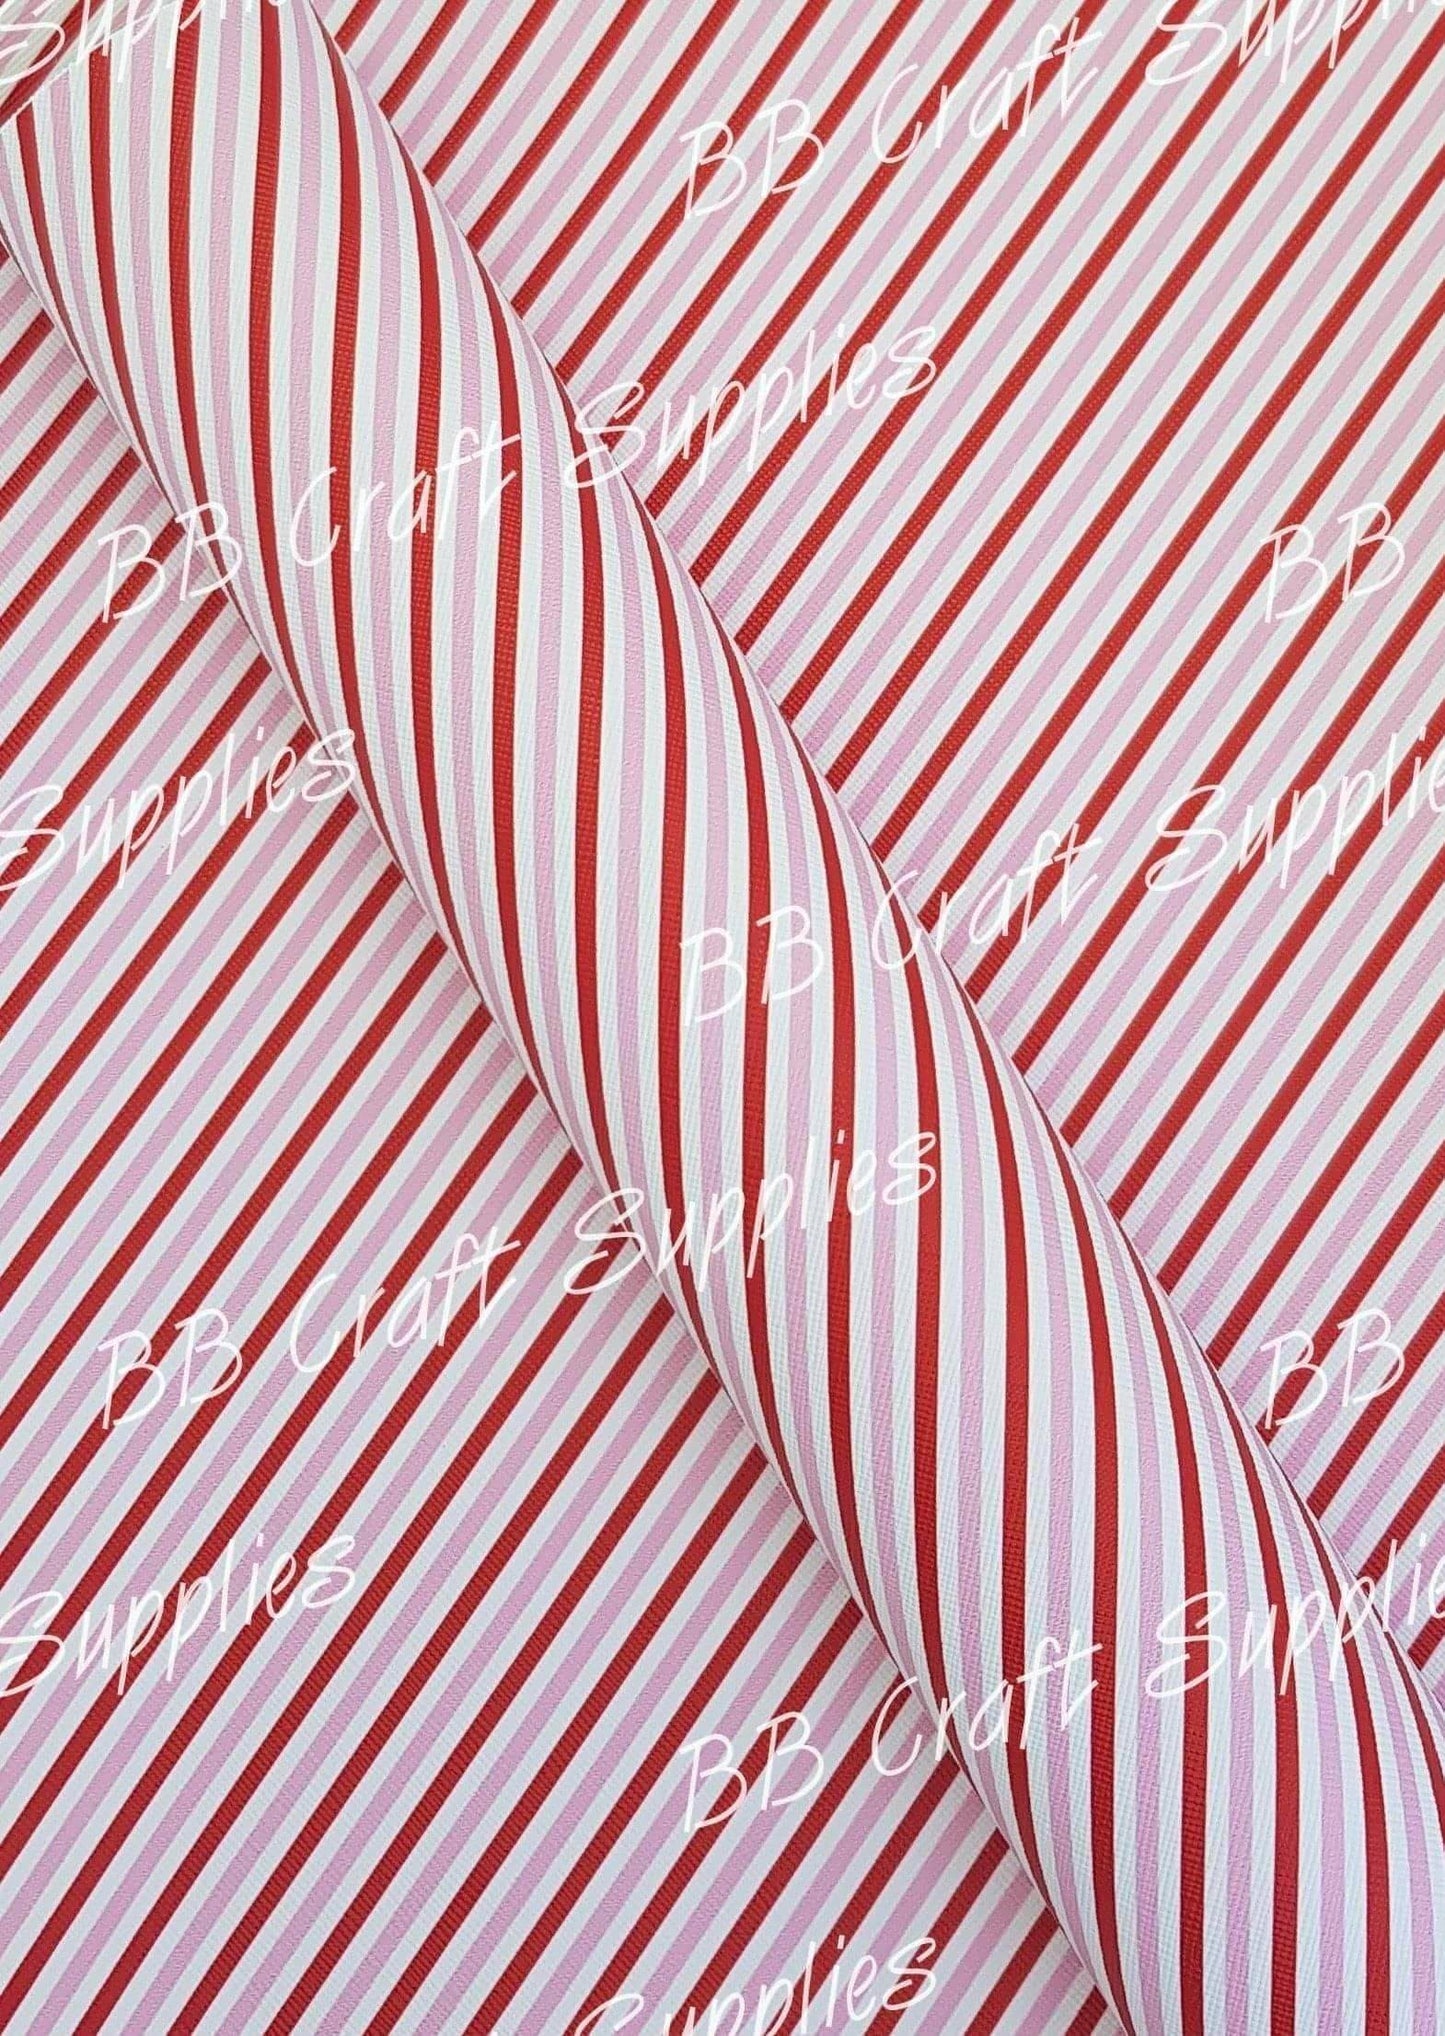 Red & Pink Diagonal Stripe Faux Leather - Faux, Faux Leather, Leather, leatherette, Stripe - Bare Butler Faux Leather Supplies 